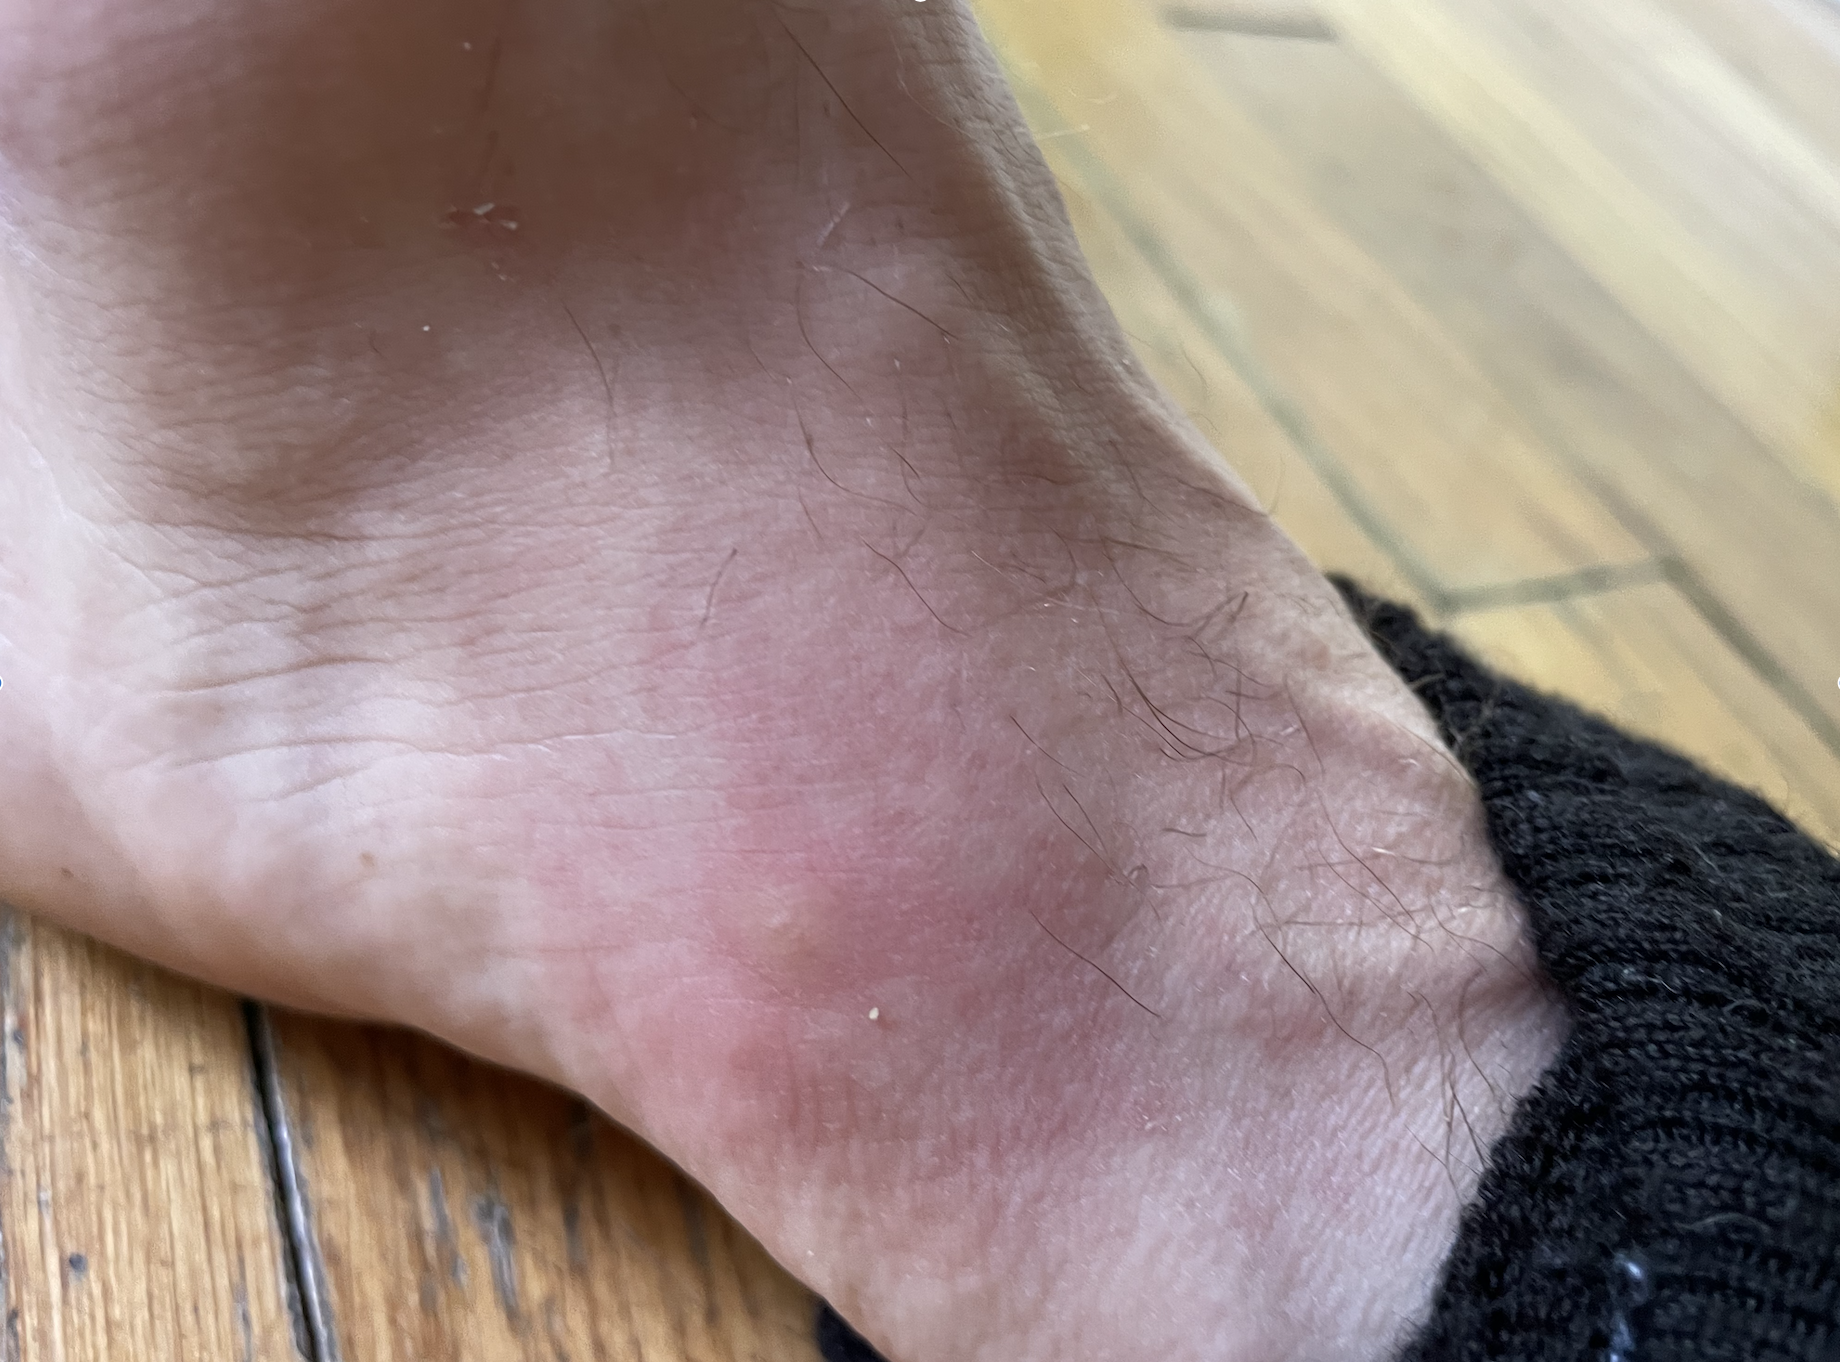 Mosquito bite on a foot